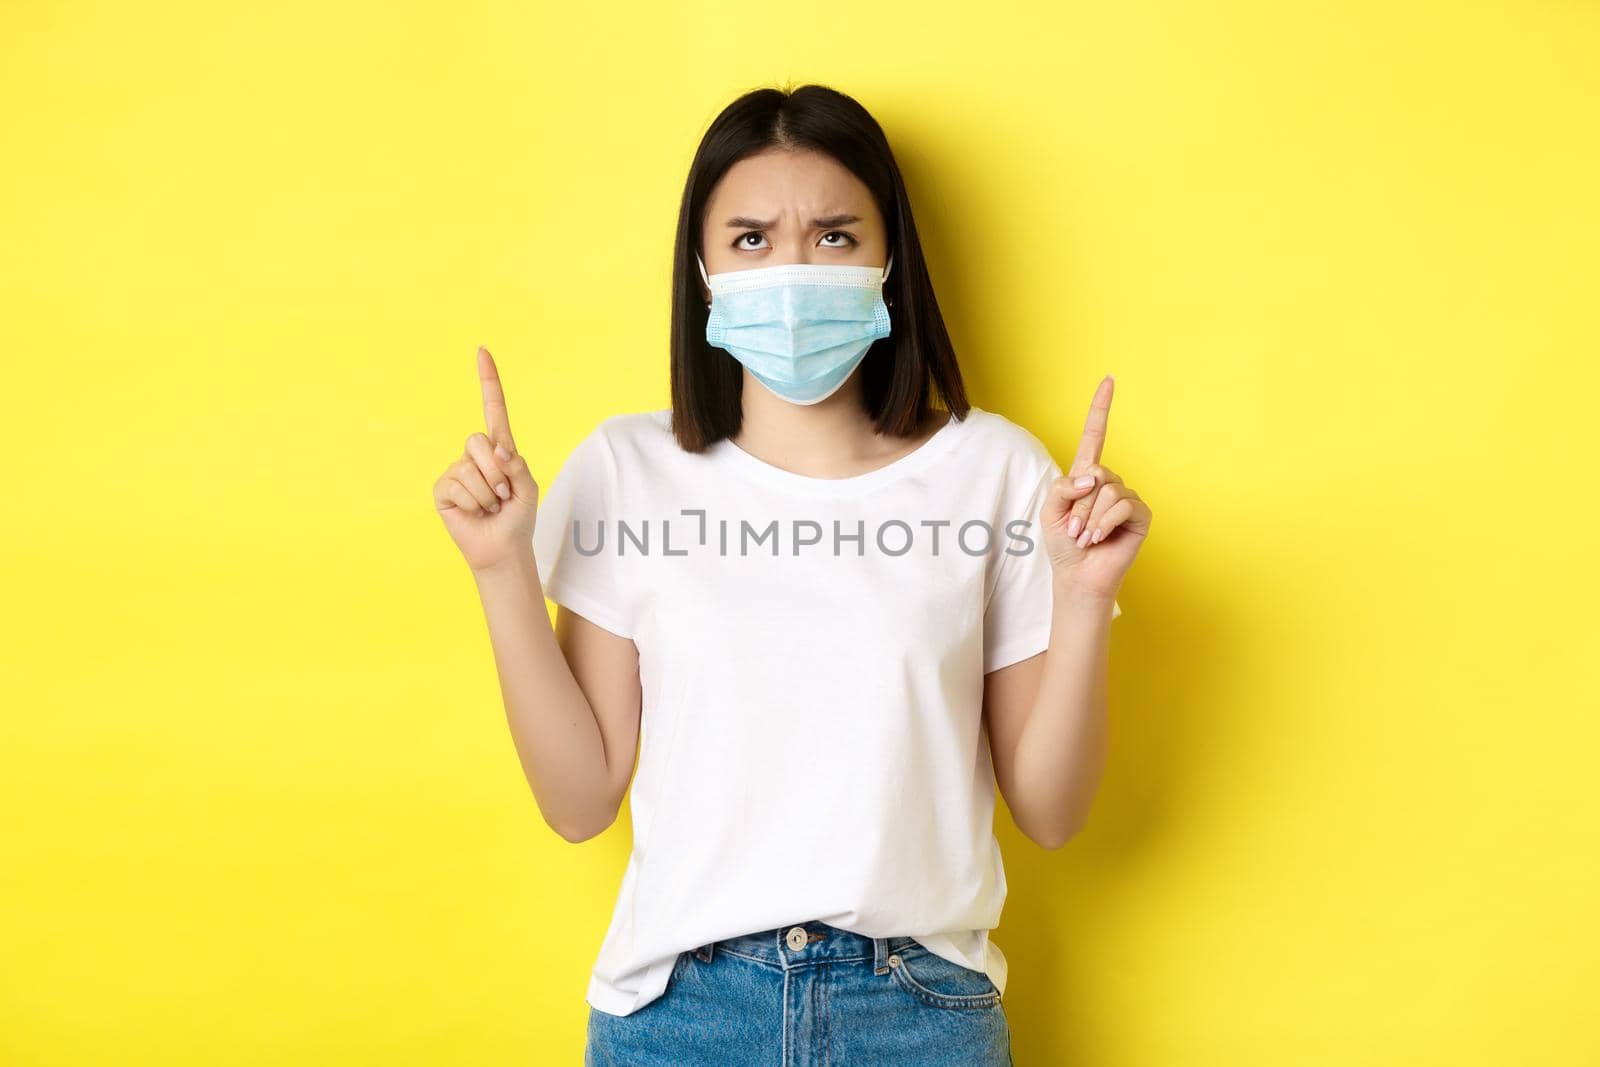 Covid-19, pandemic and social distancing concept. Disappointed asian girl in medical mask, frowning upset and pointing fingers up at logo, standing over yellow background.